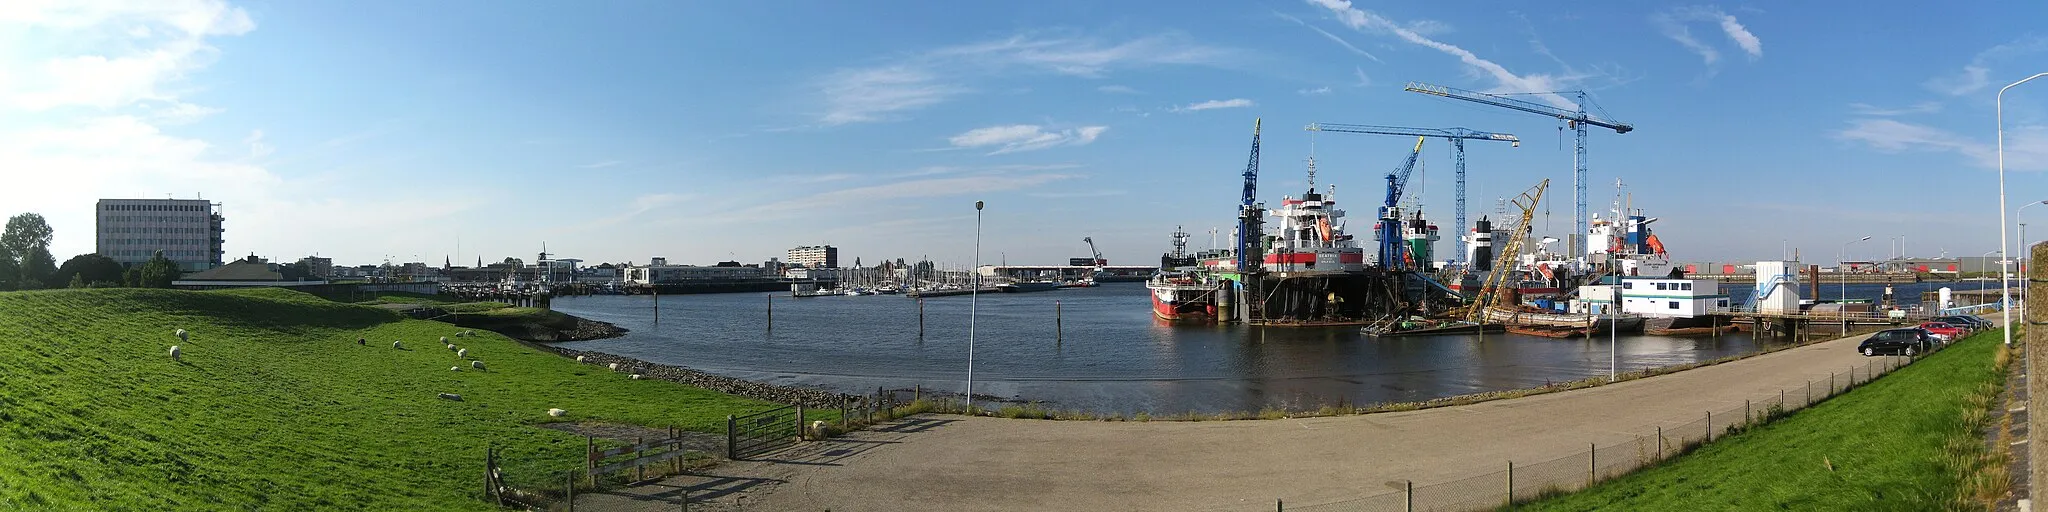 Photo showing: The western part of the harbour of Delfzijl, a port in the Dutch province of Groningen.